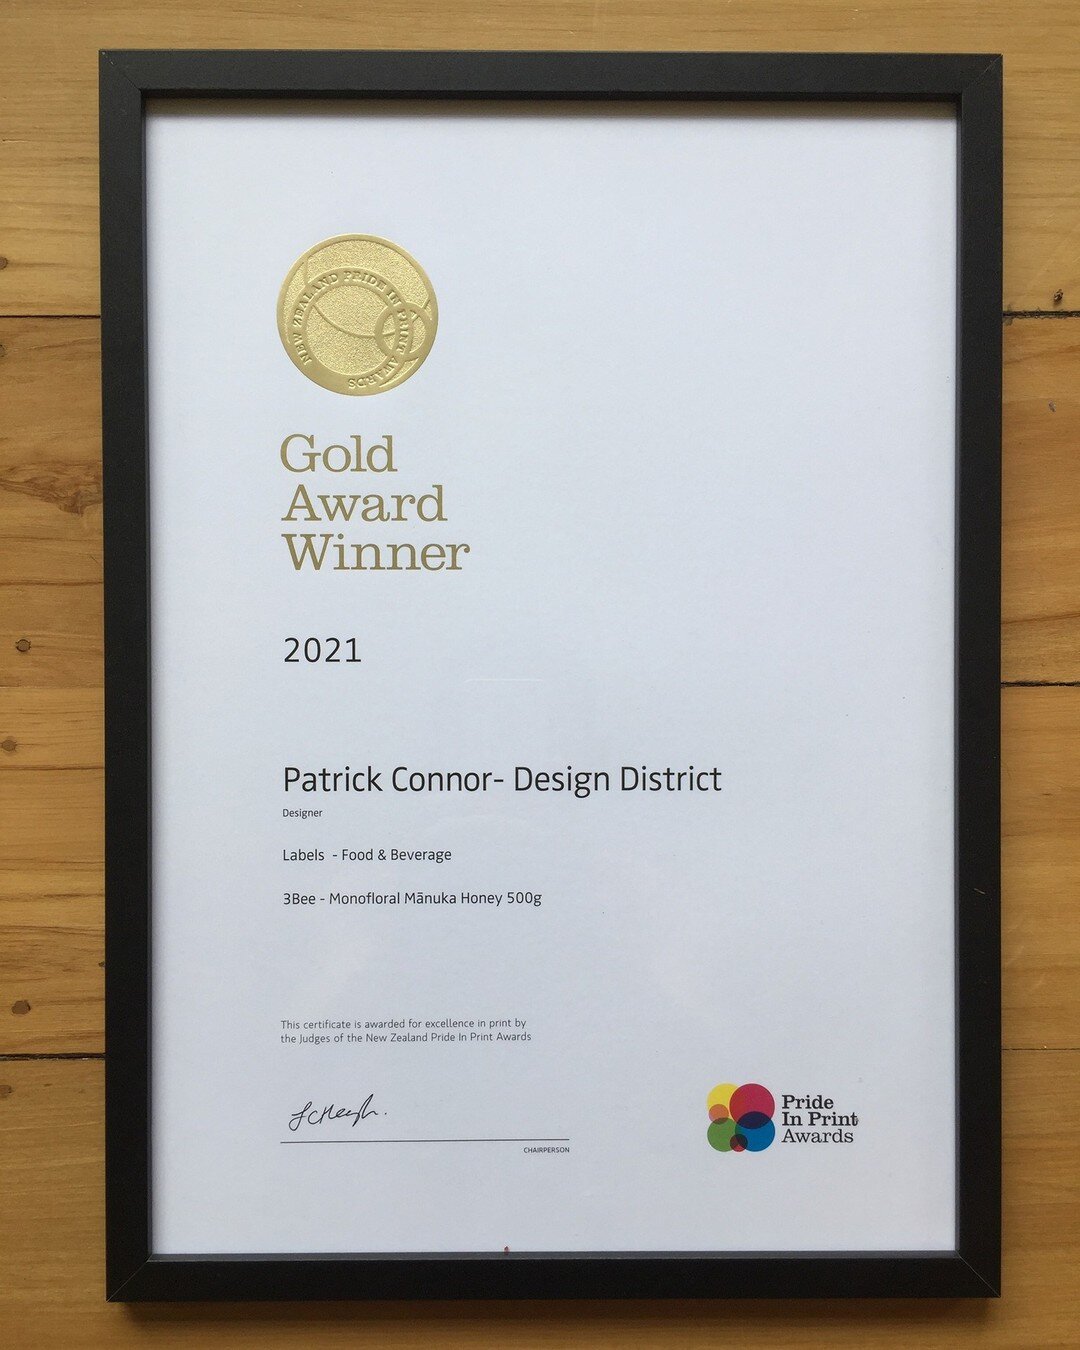 Great start to 2022! Design District picked up another award, this time for the packaging design I did alongside the team at @3beenaturalskincare 

Thanks to https://www.prideinprintawards.co.nz/award-winners/2021-winners/